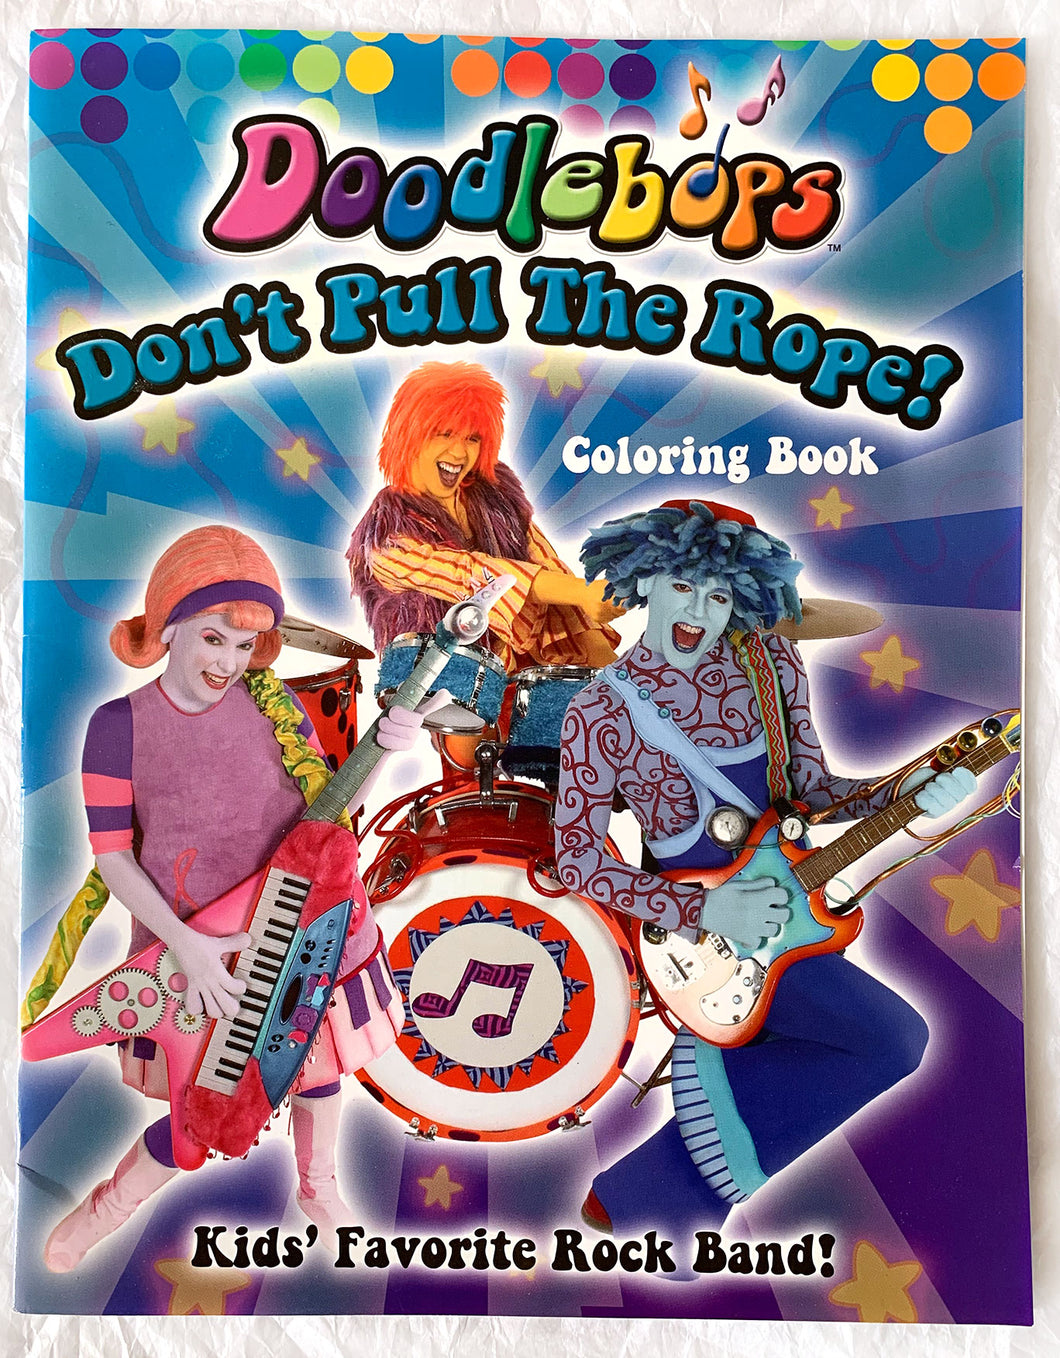 Another Doodlebops Coloring Book